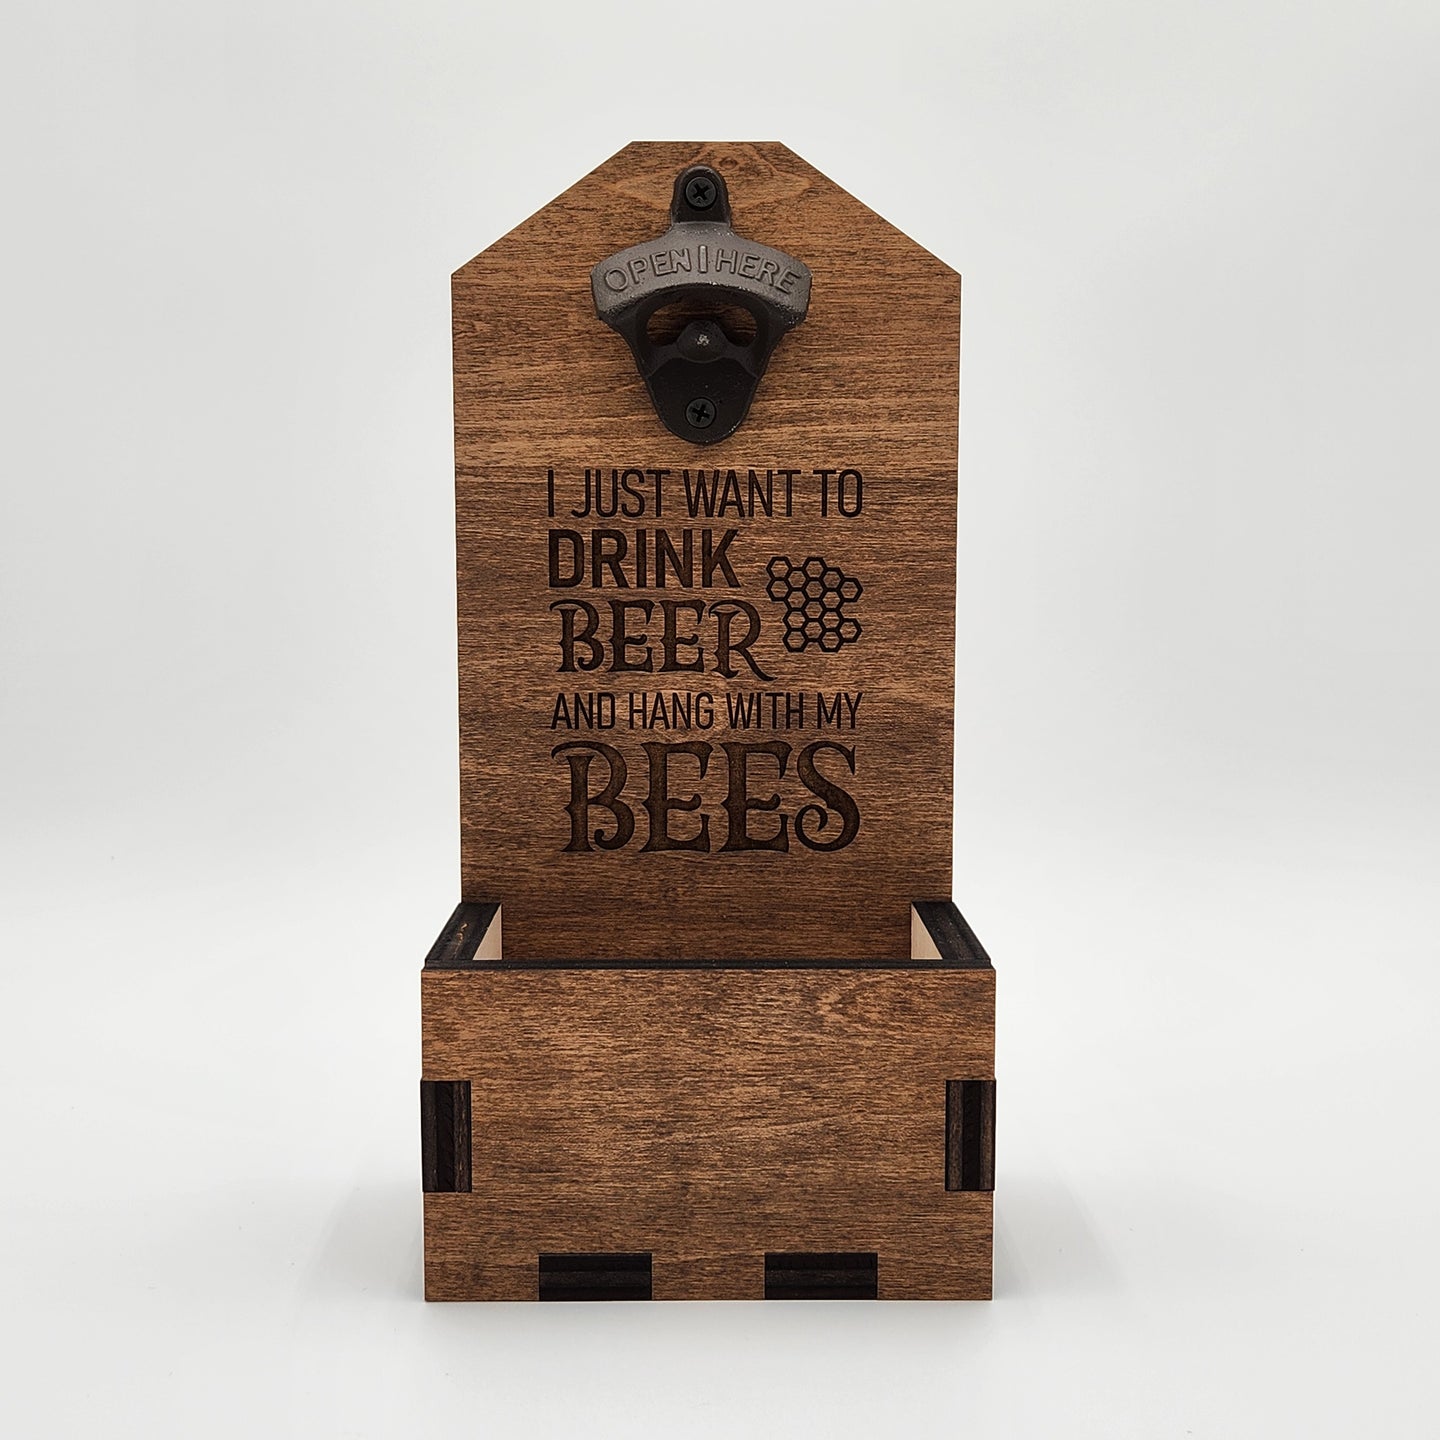 Wall Mounted Bottle Opener with Cap Catcher (Customizable)